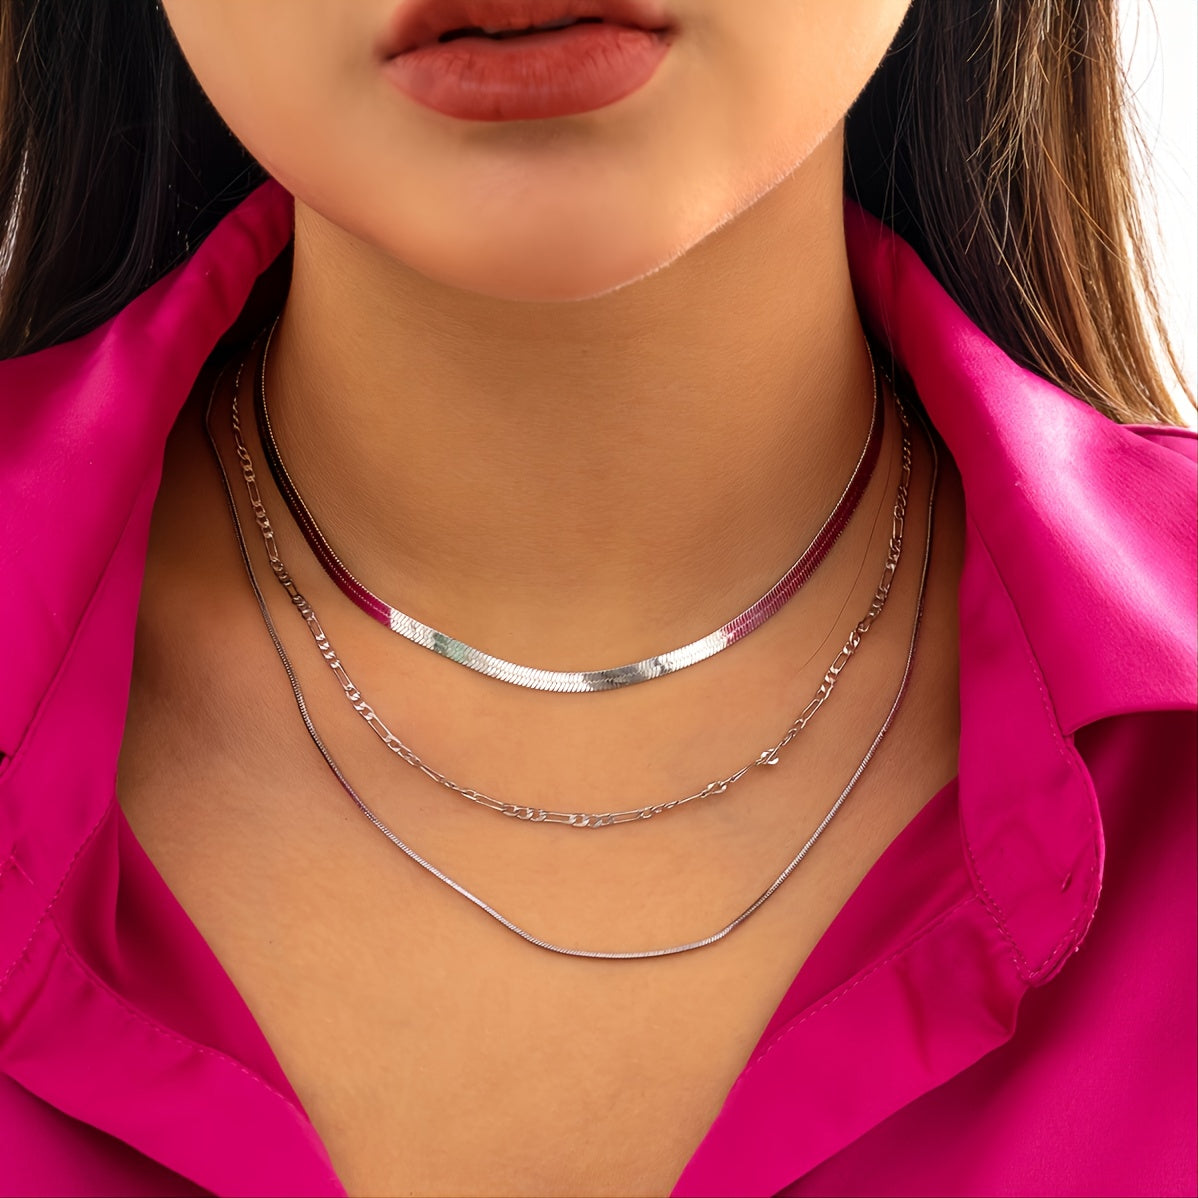 Gorgeous Multilayer Necklace - Simple Fashion Snake Chain Charm